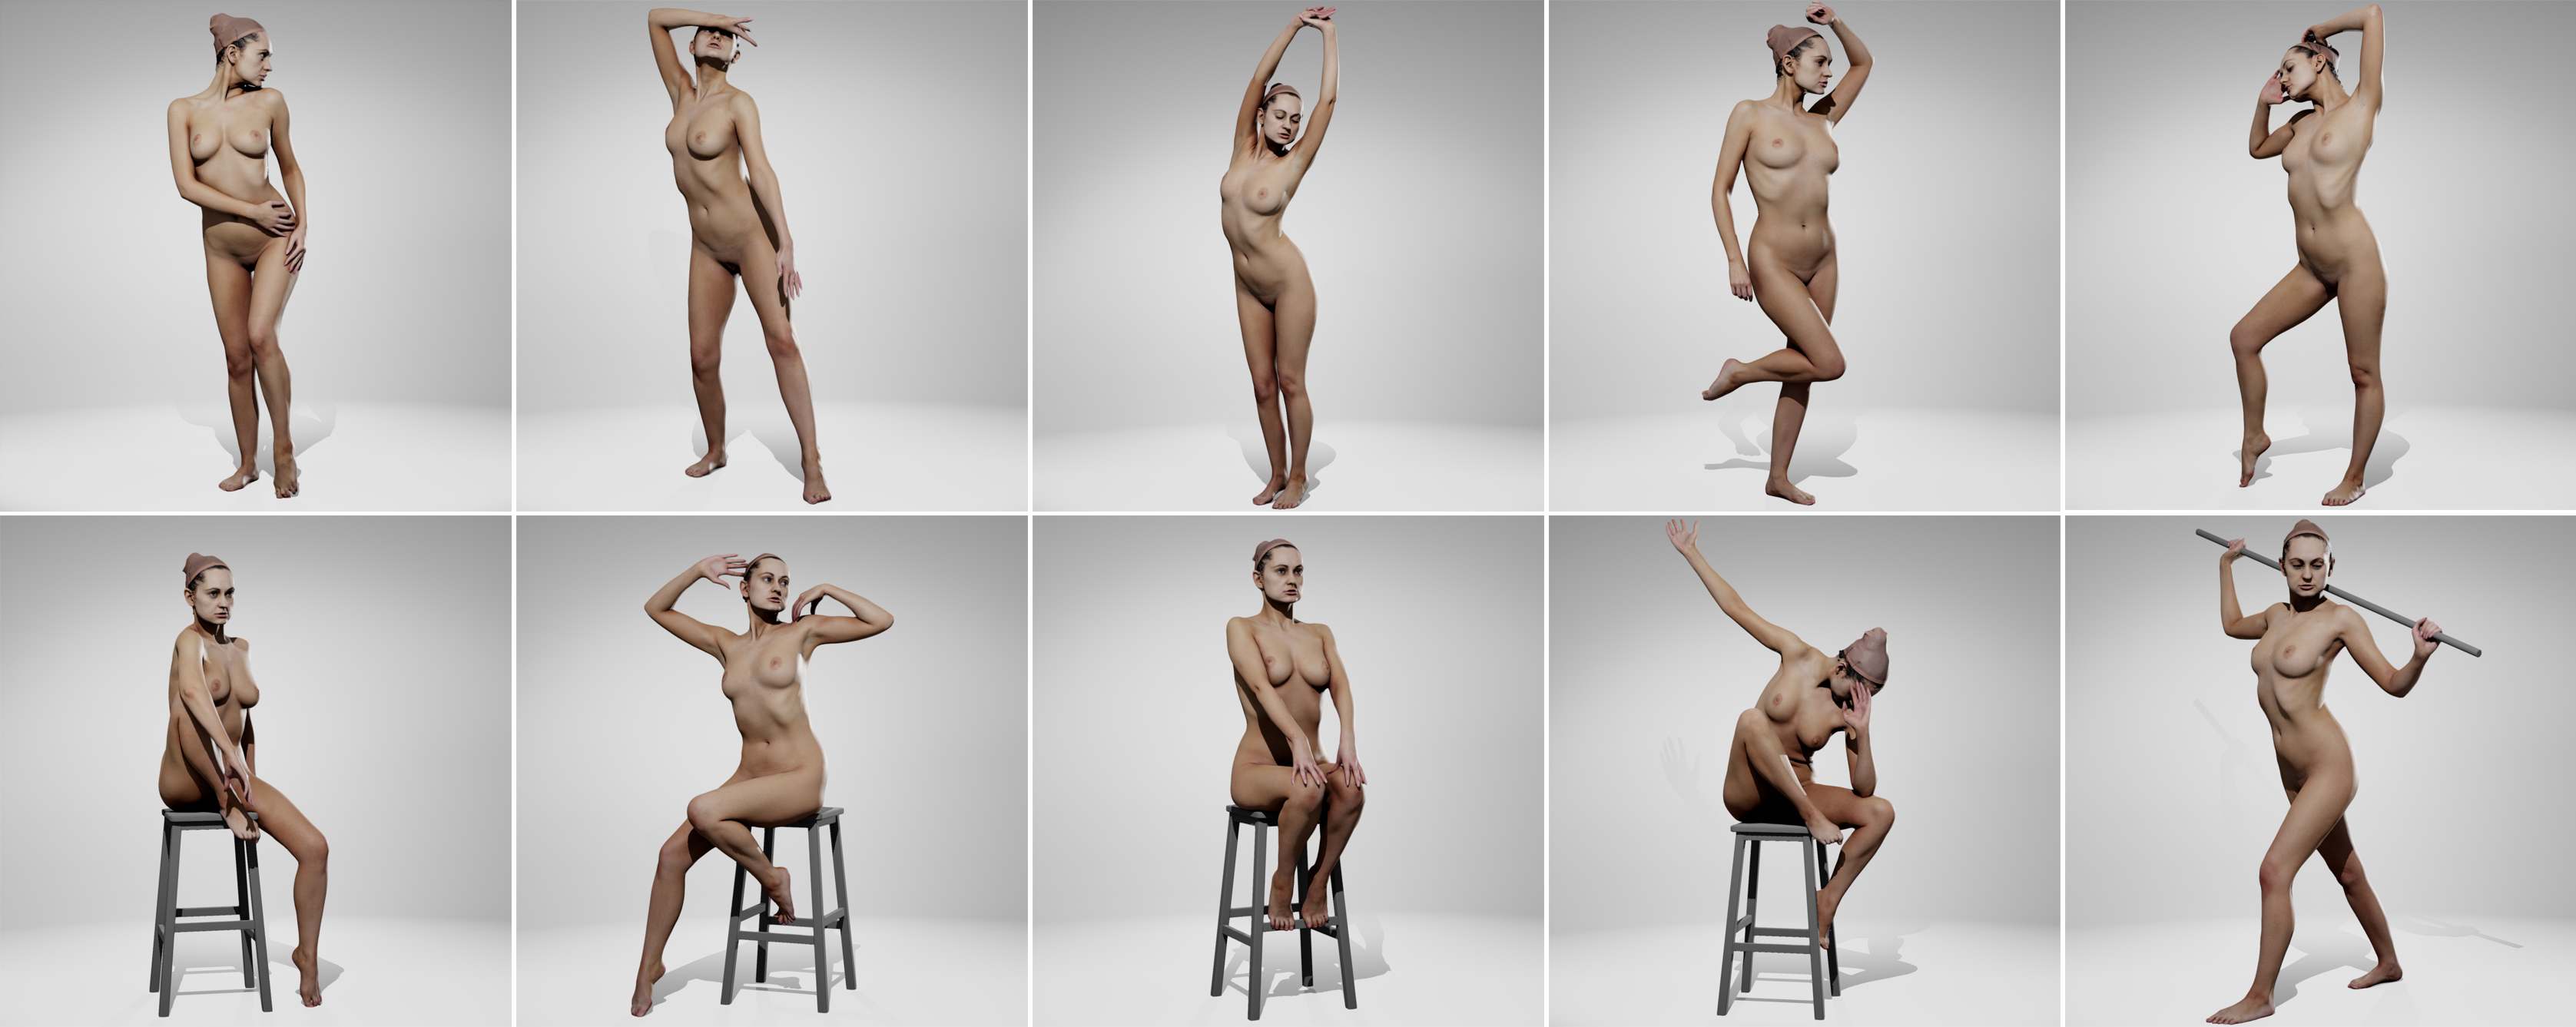 New Anatomy 360 Pack with 40 Poses.